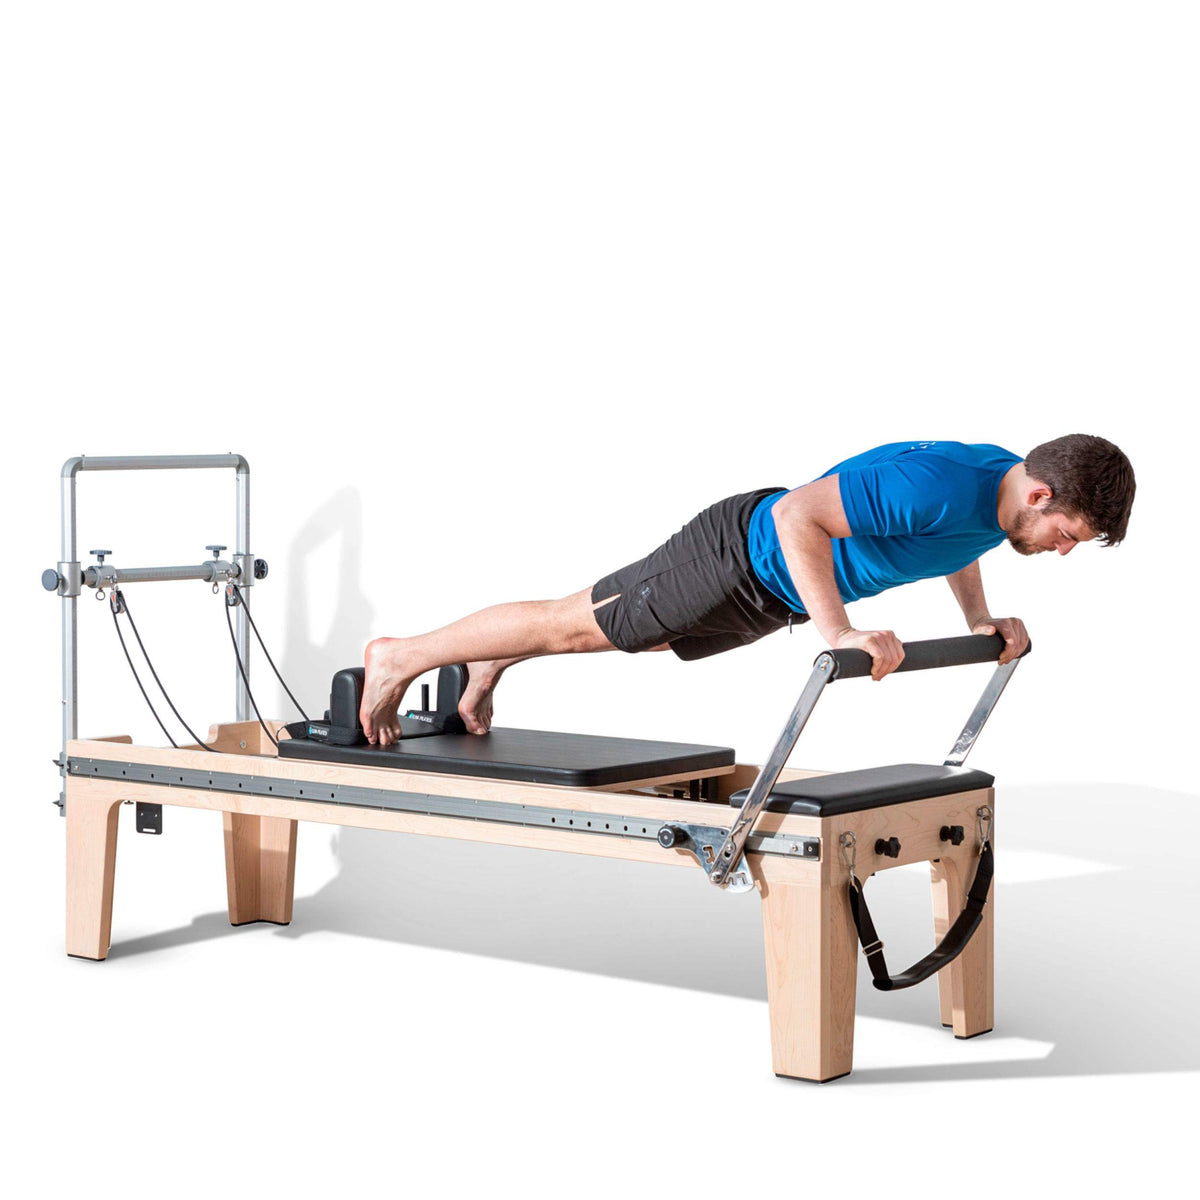 Elina Pilates Mentor Reformer With Tower - Top Sports Tech